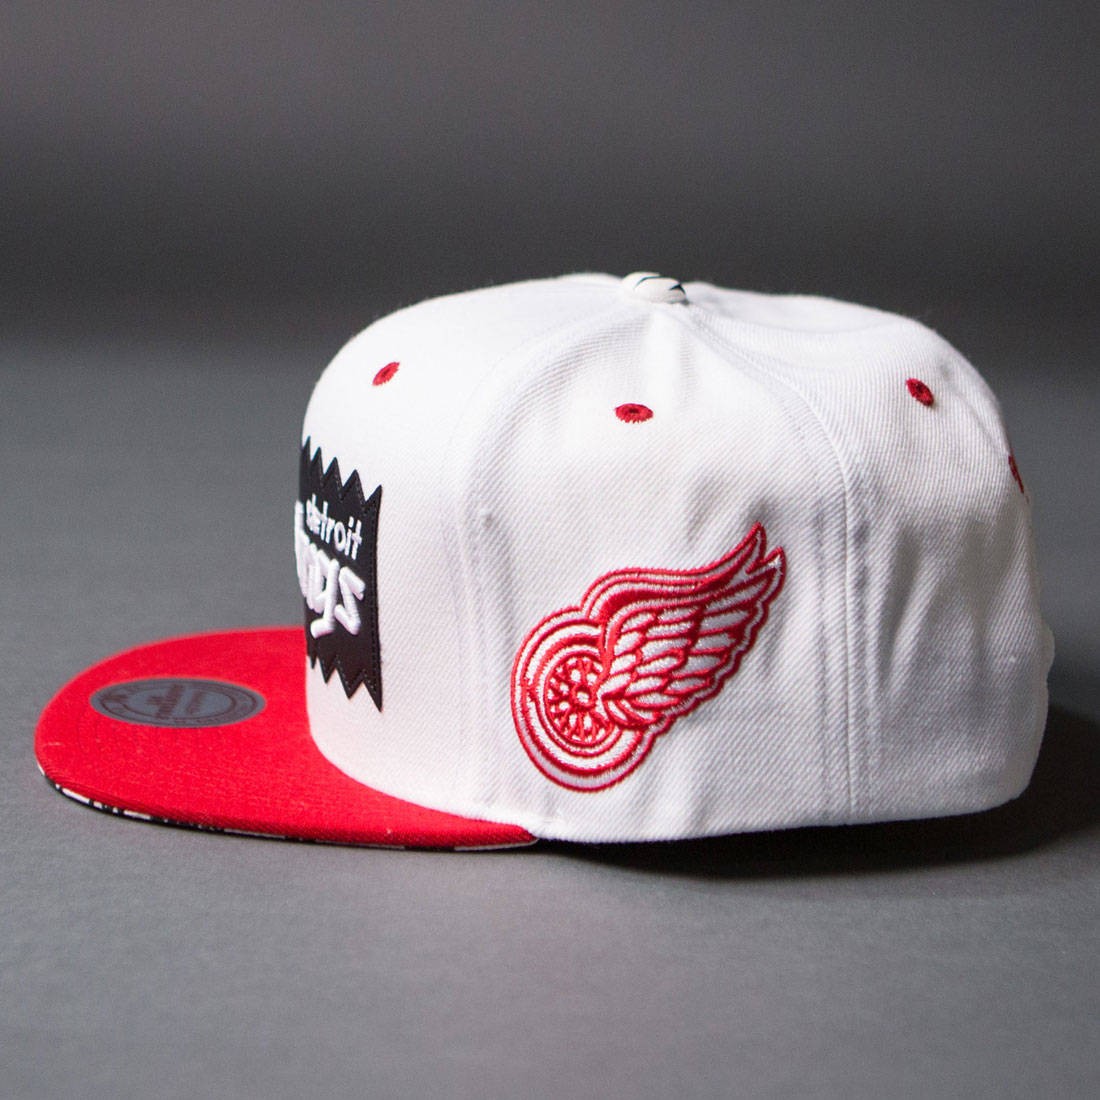 Snapback - Detroit Red Wings Mitchell & Ness Nostalgia Co.